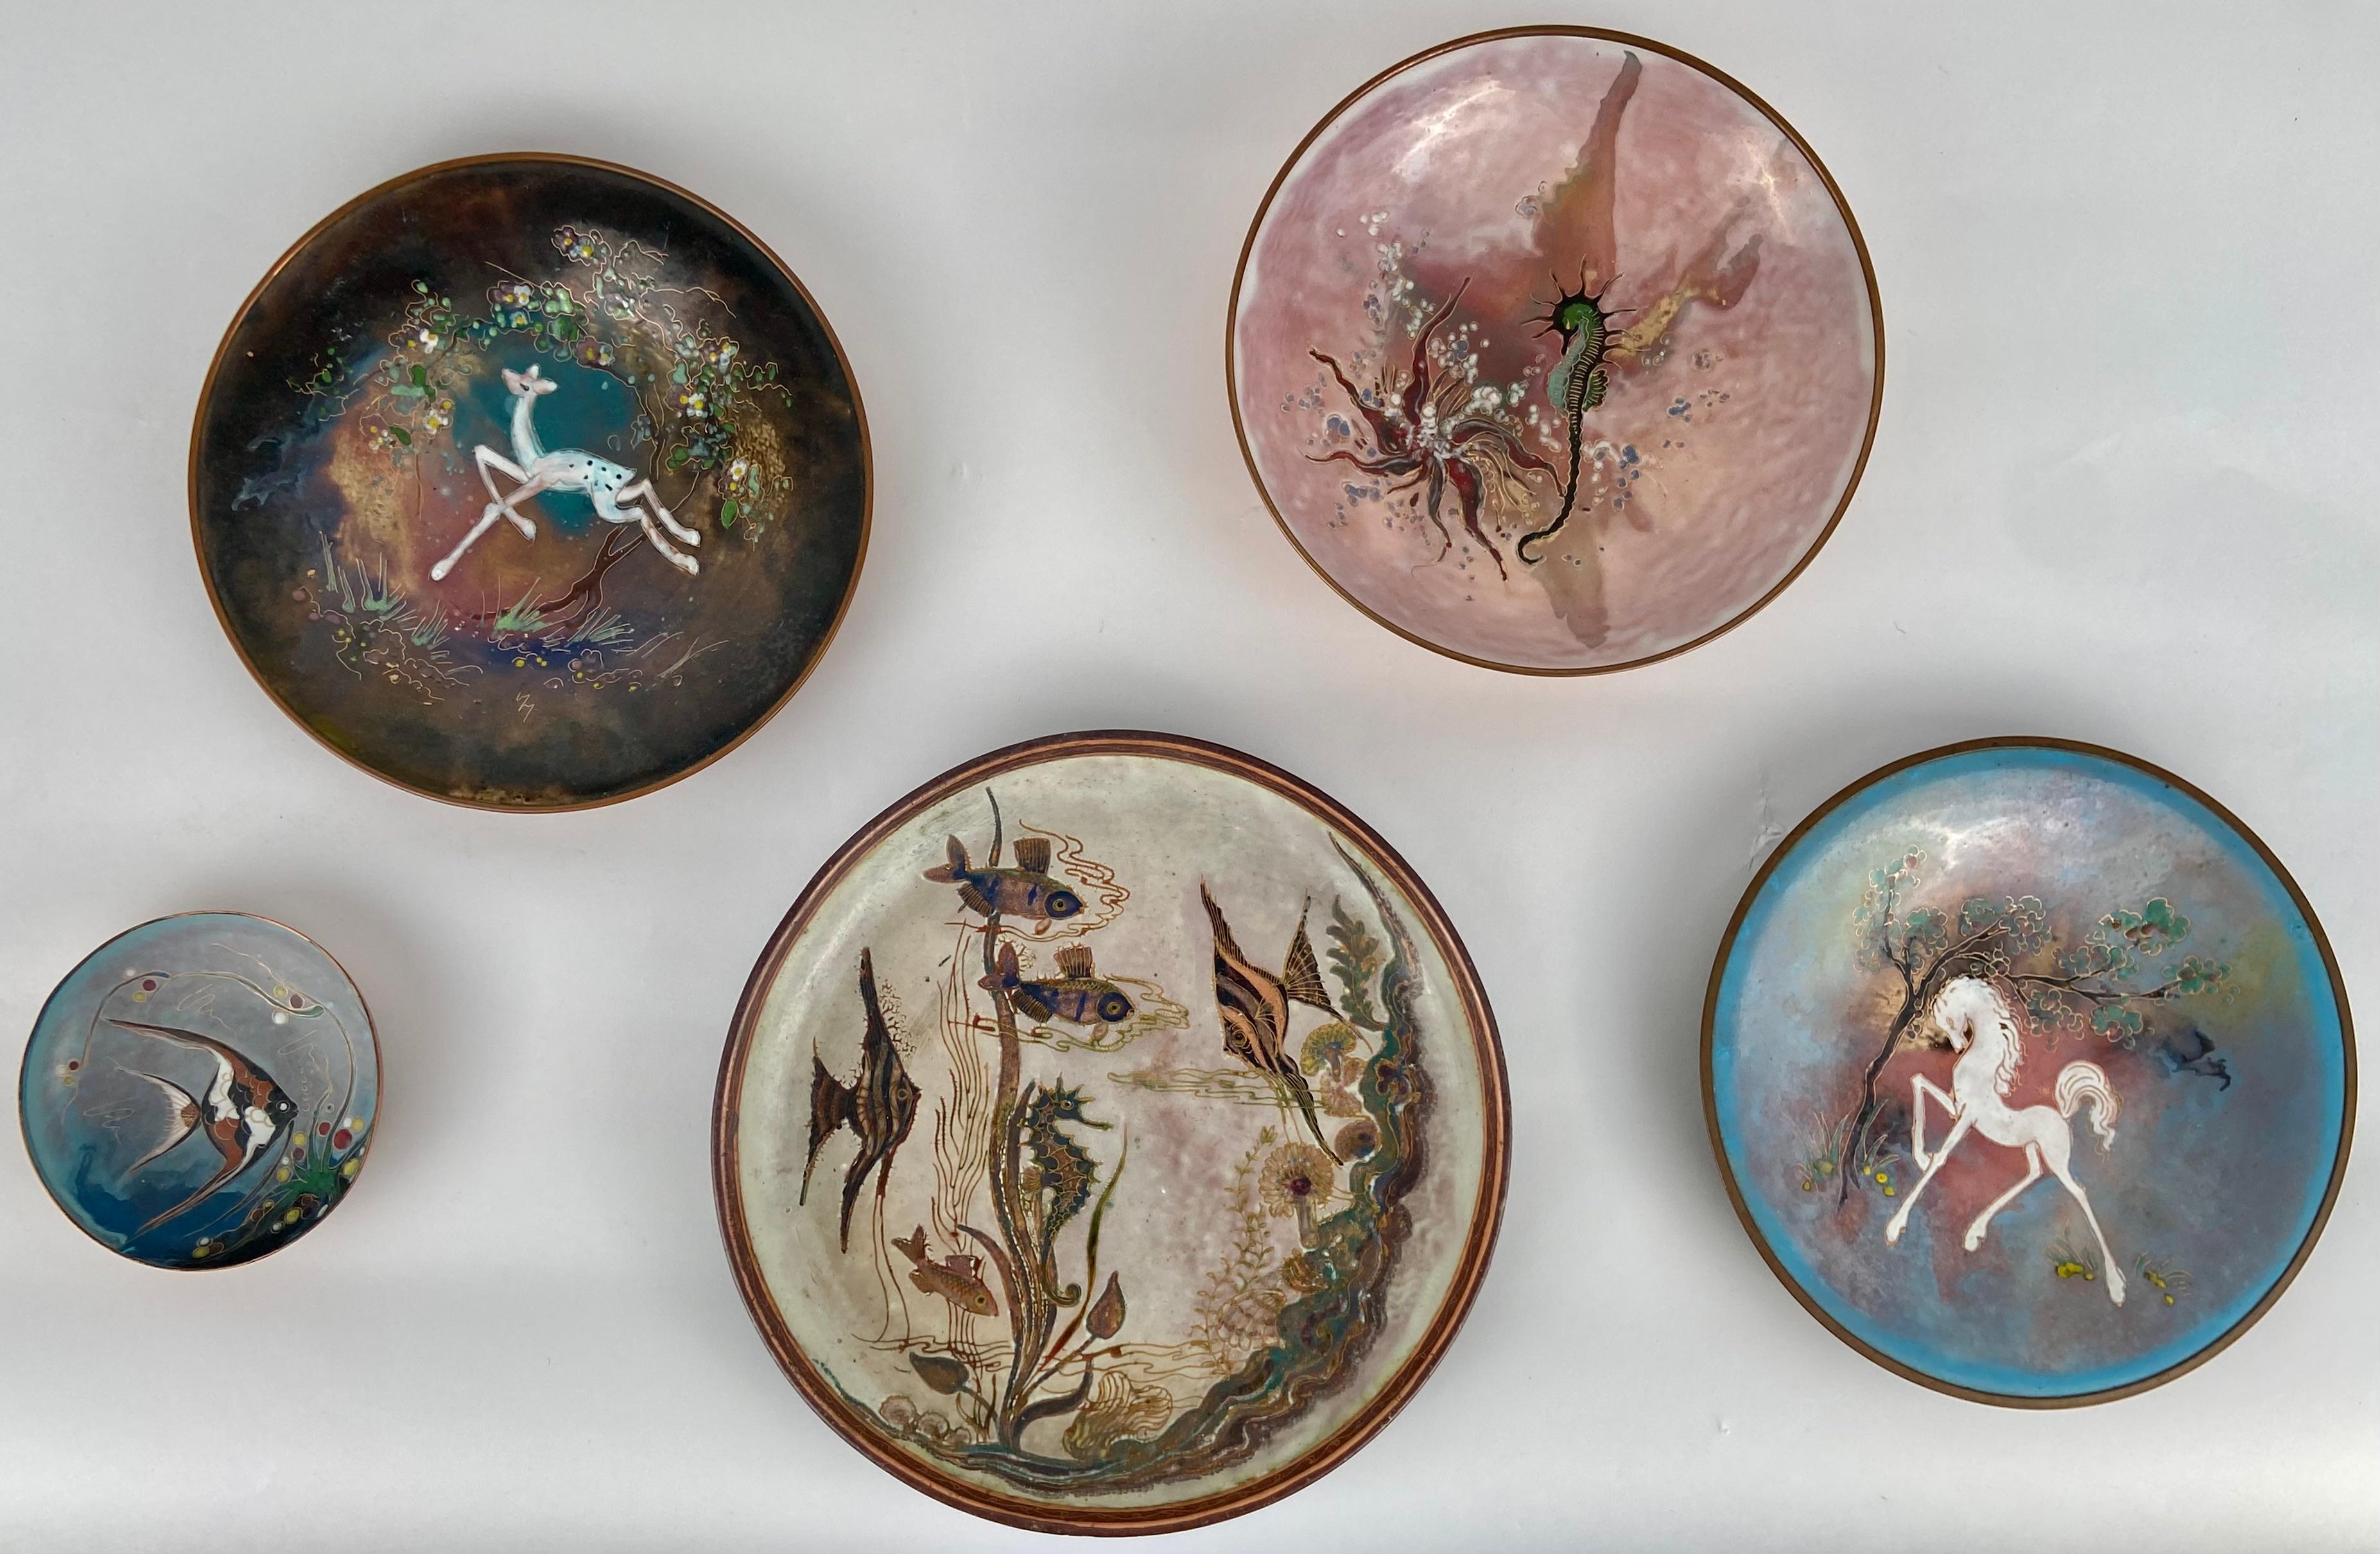 Series of 5 small decorative plates with enamel on copper.
With floral and animal motifs.